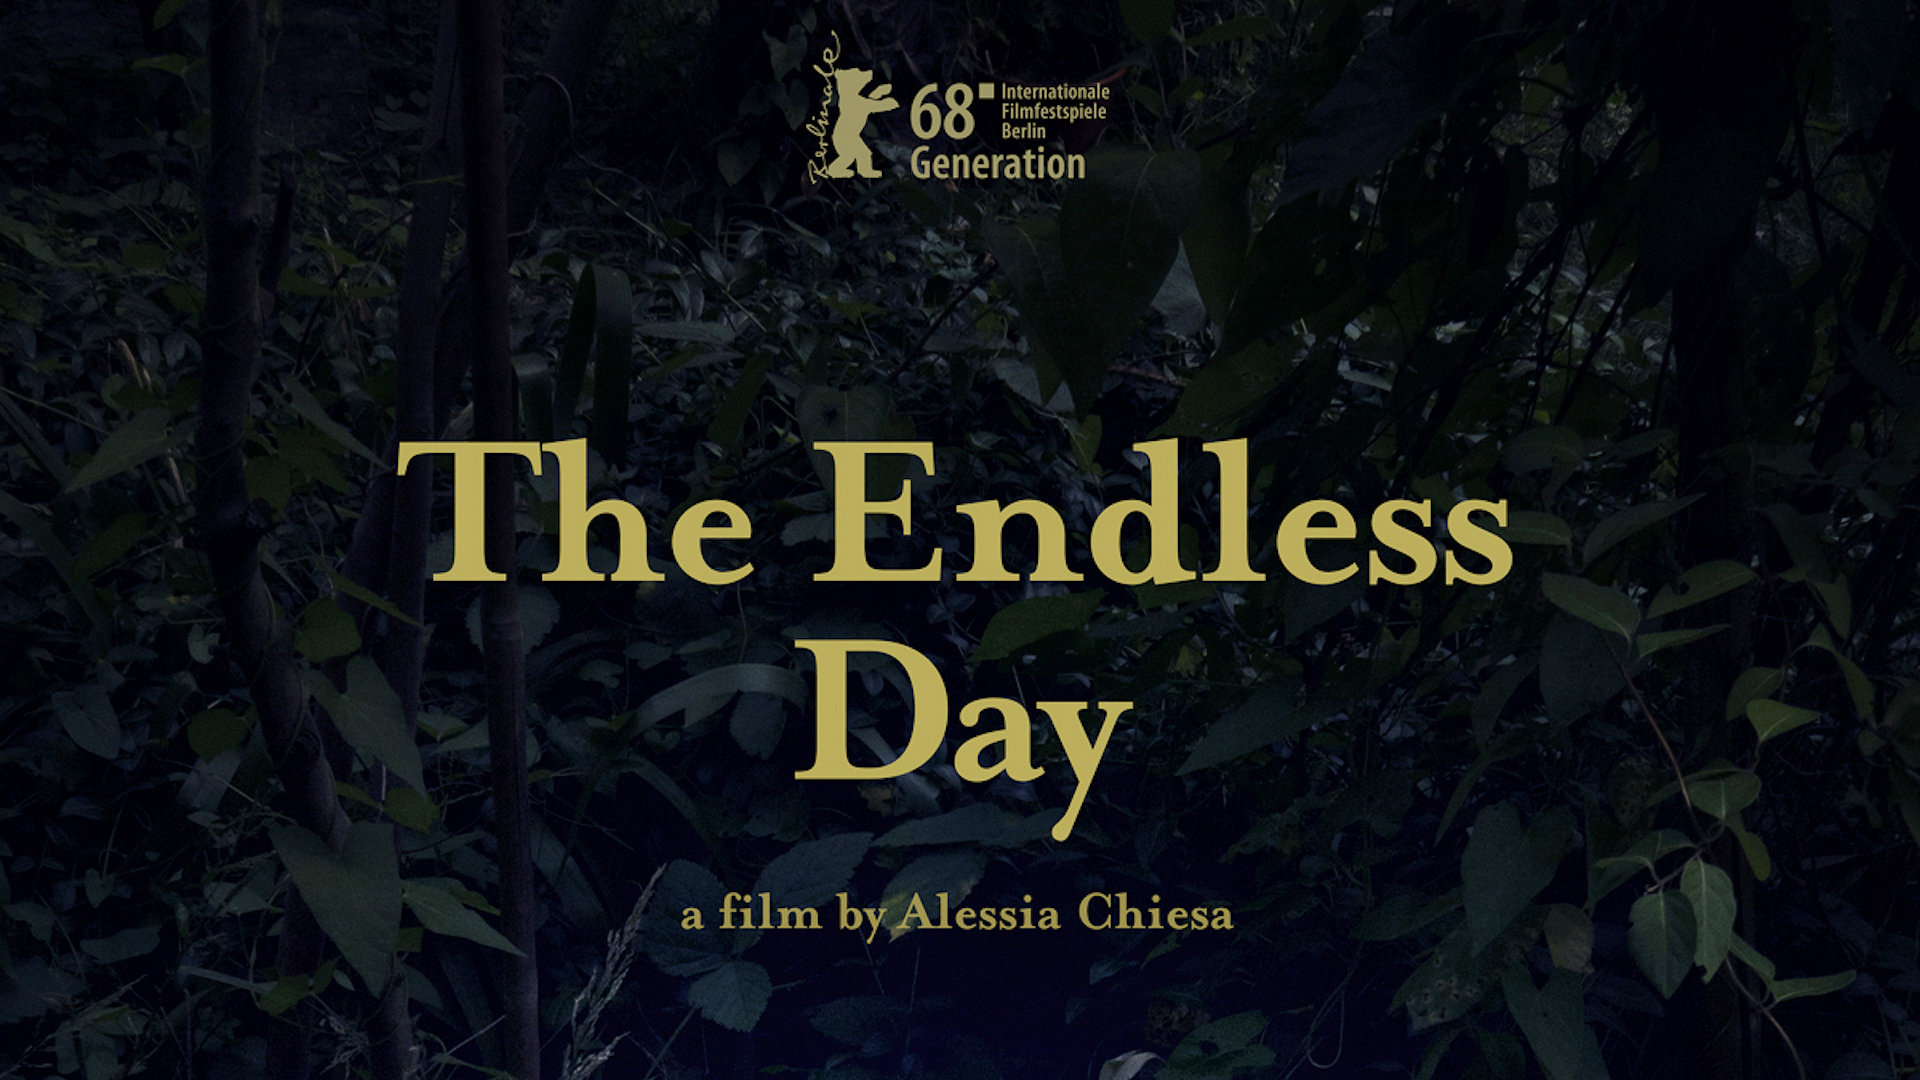 The Endless Day